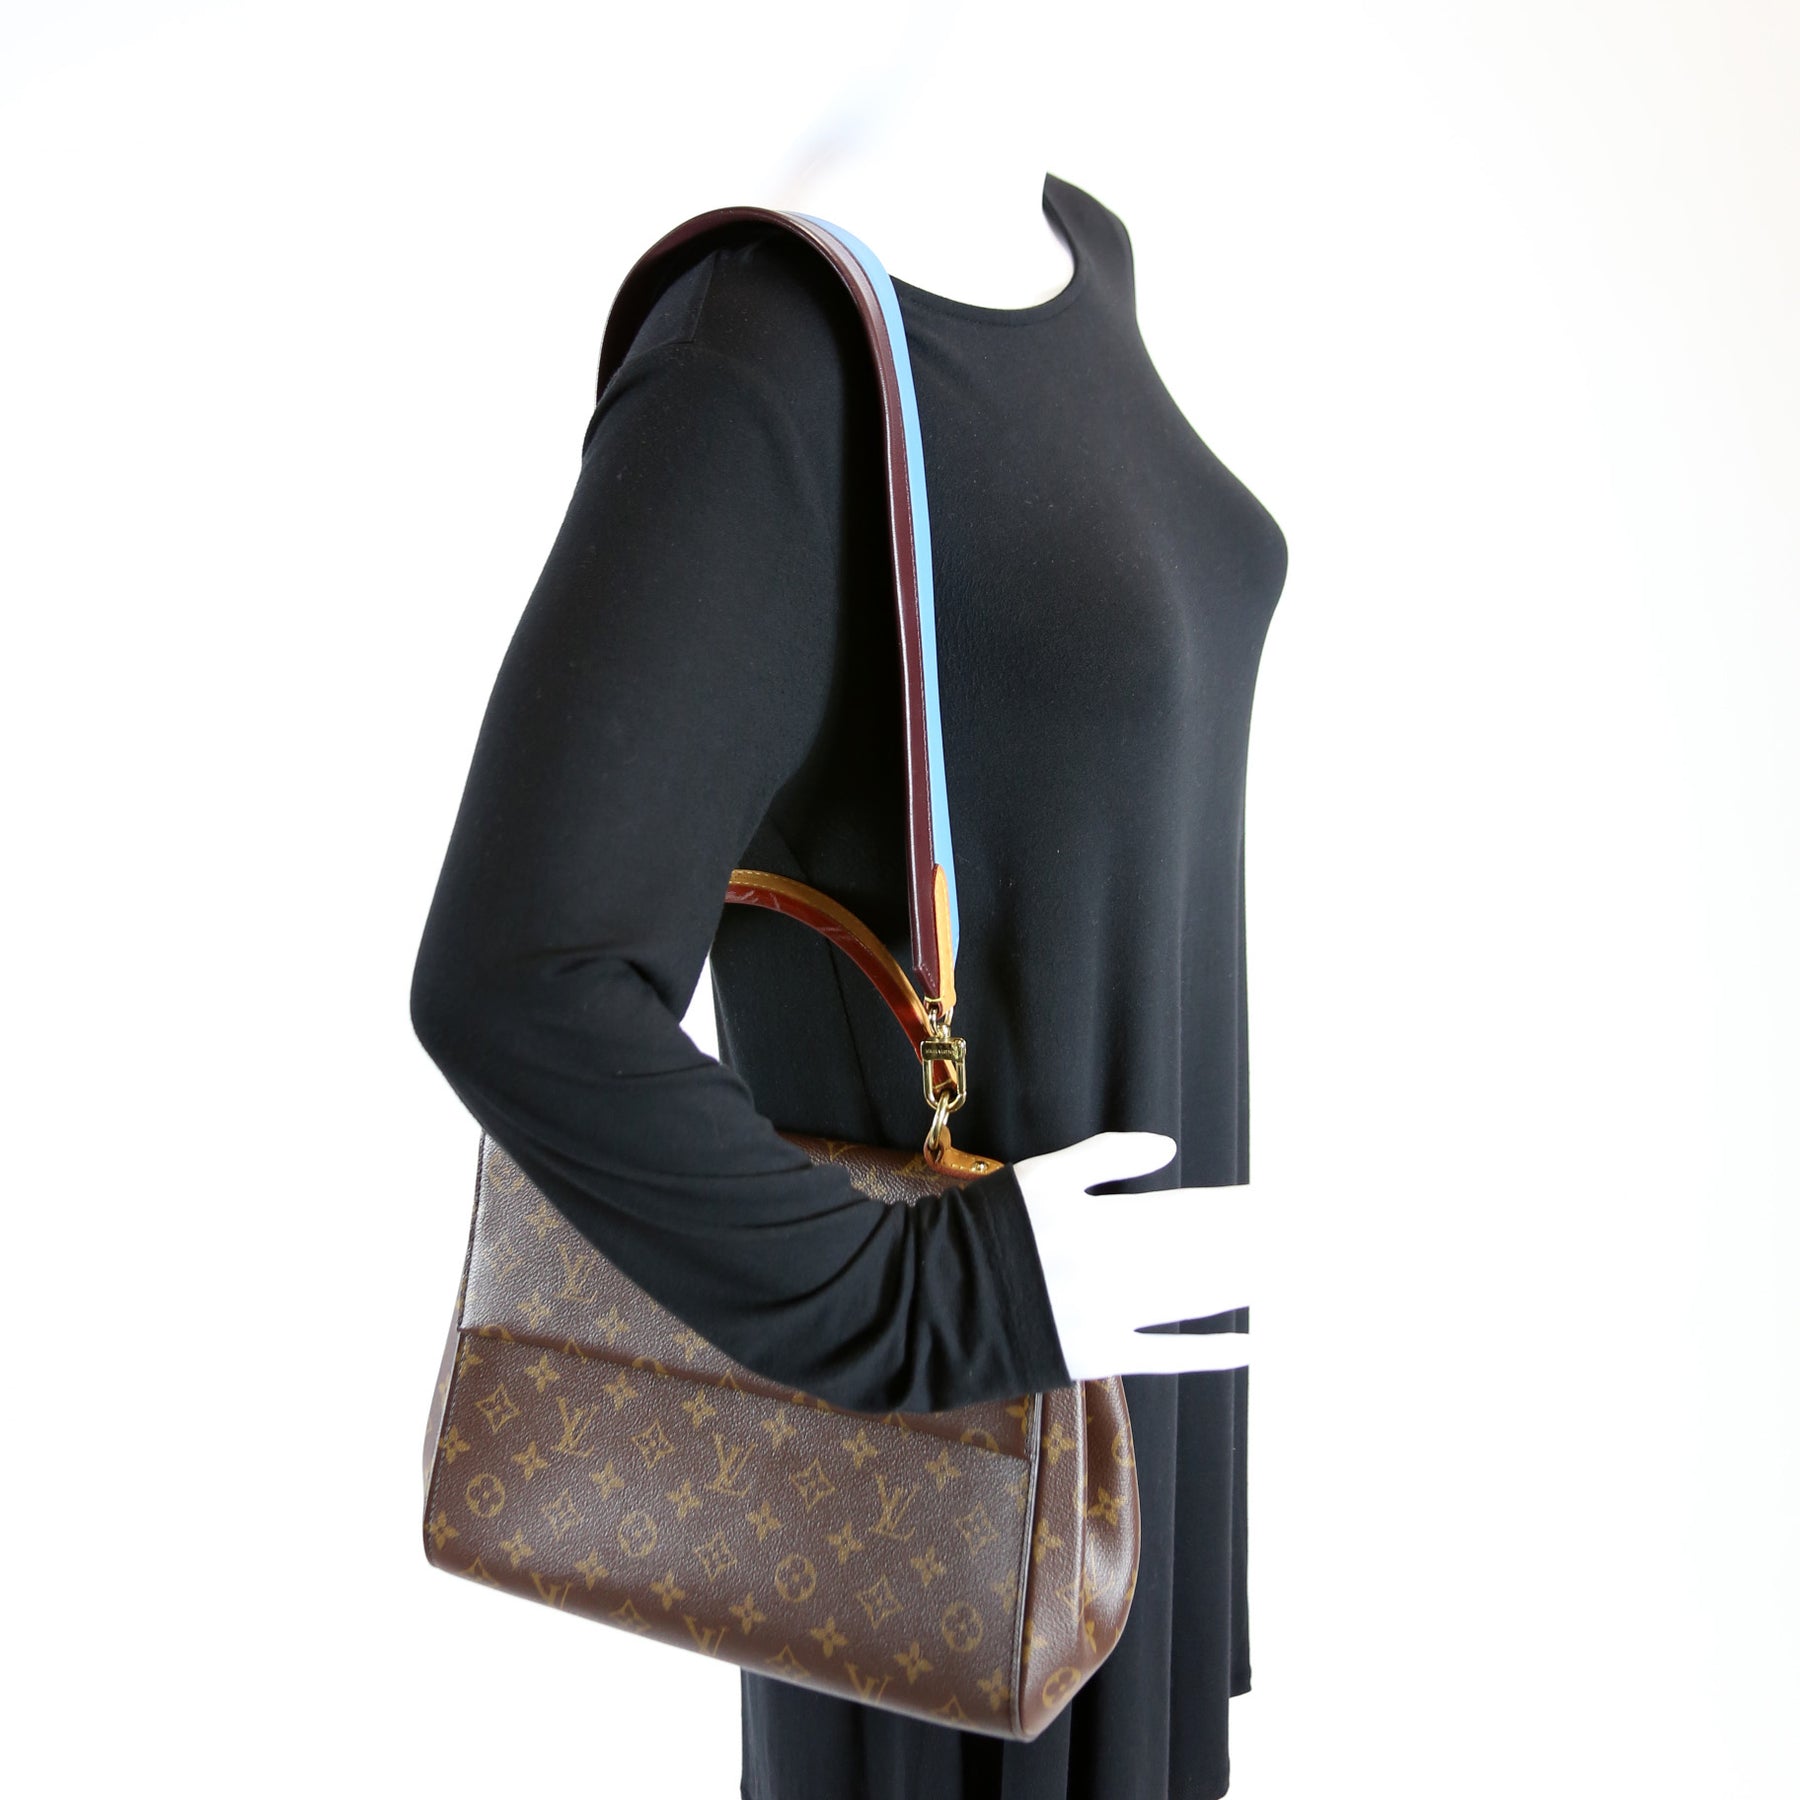 lv cluny mm outfit